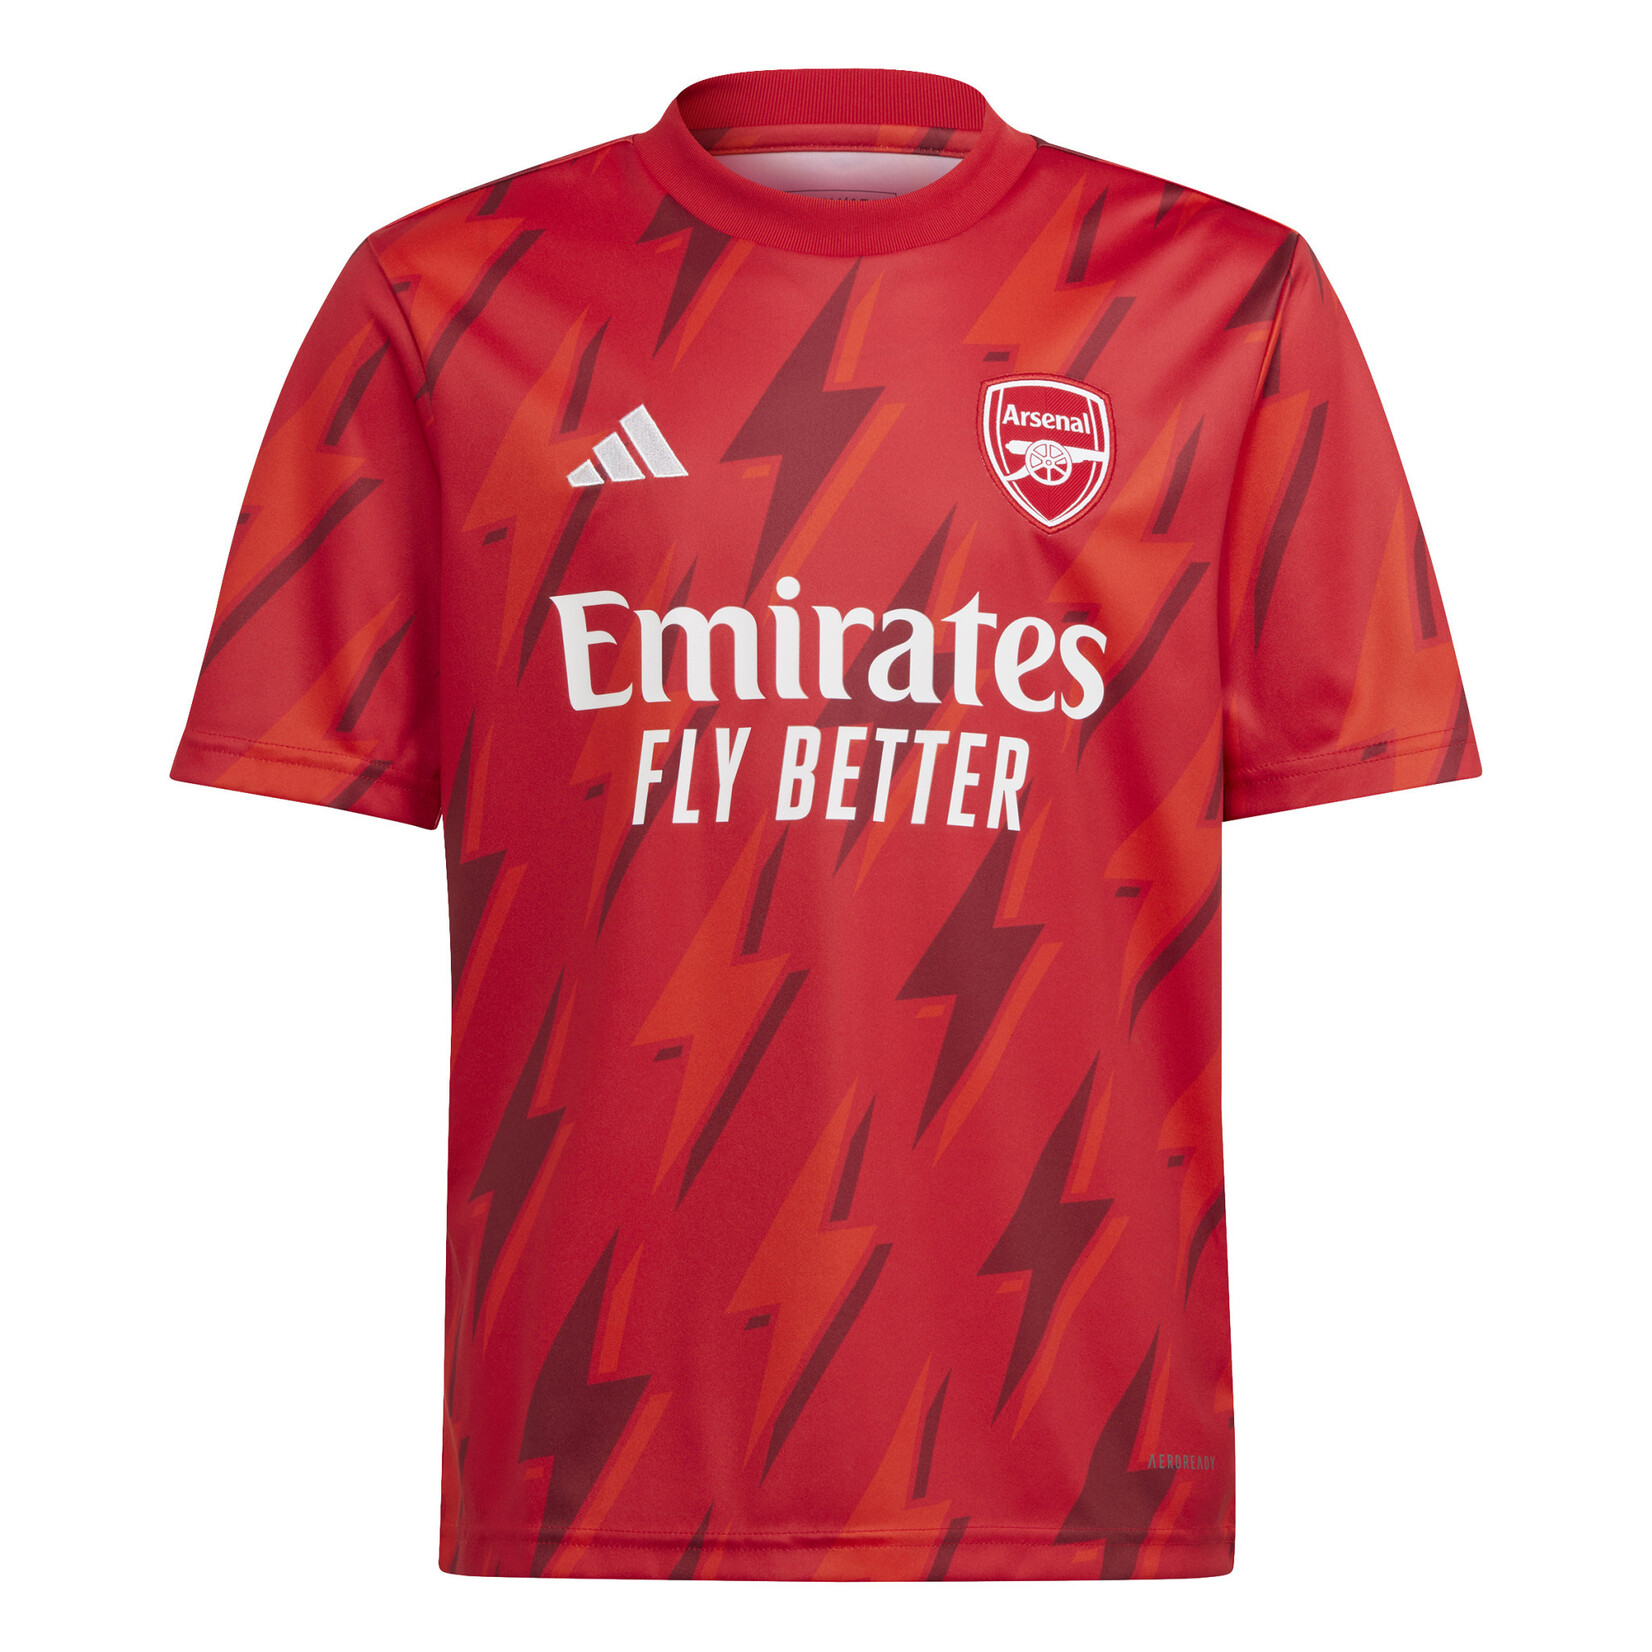 ADIDAS ARSENAL 23/24 PREMATCH JERSEY YOUTH (RED)